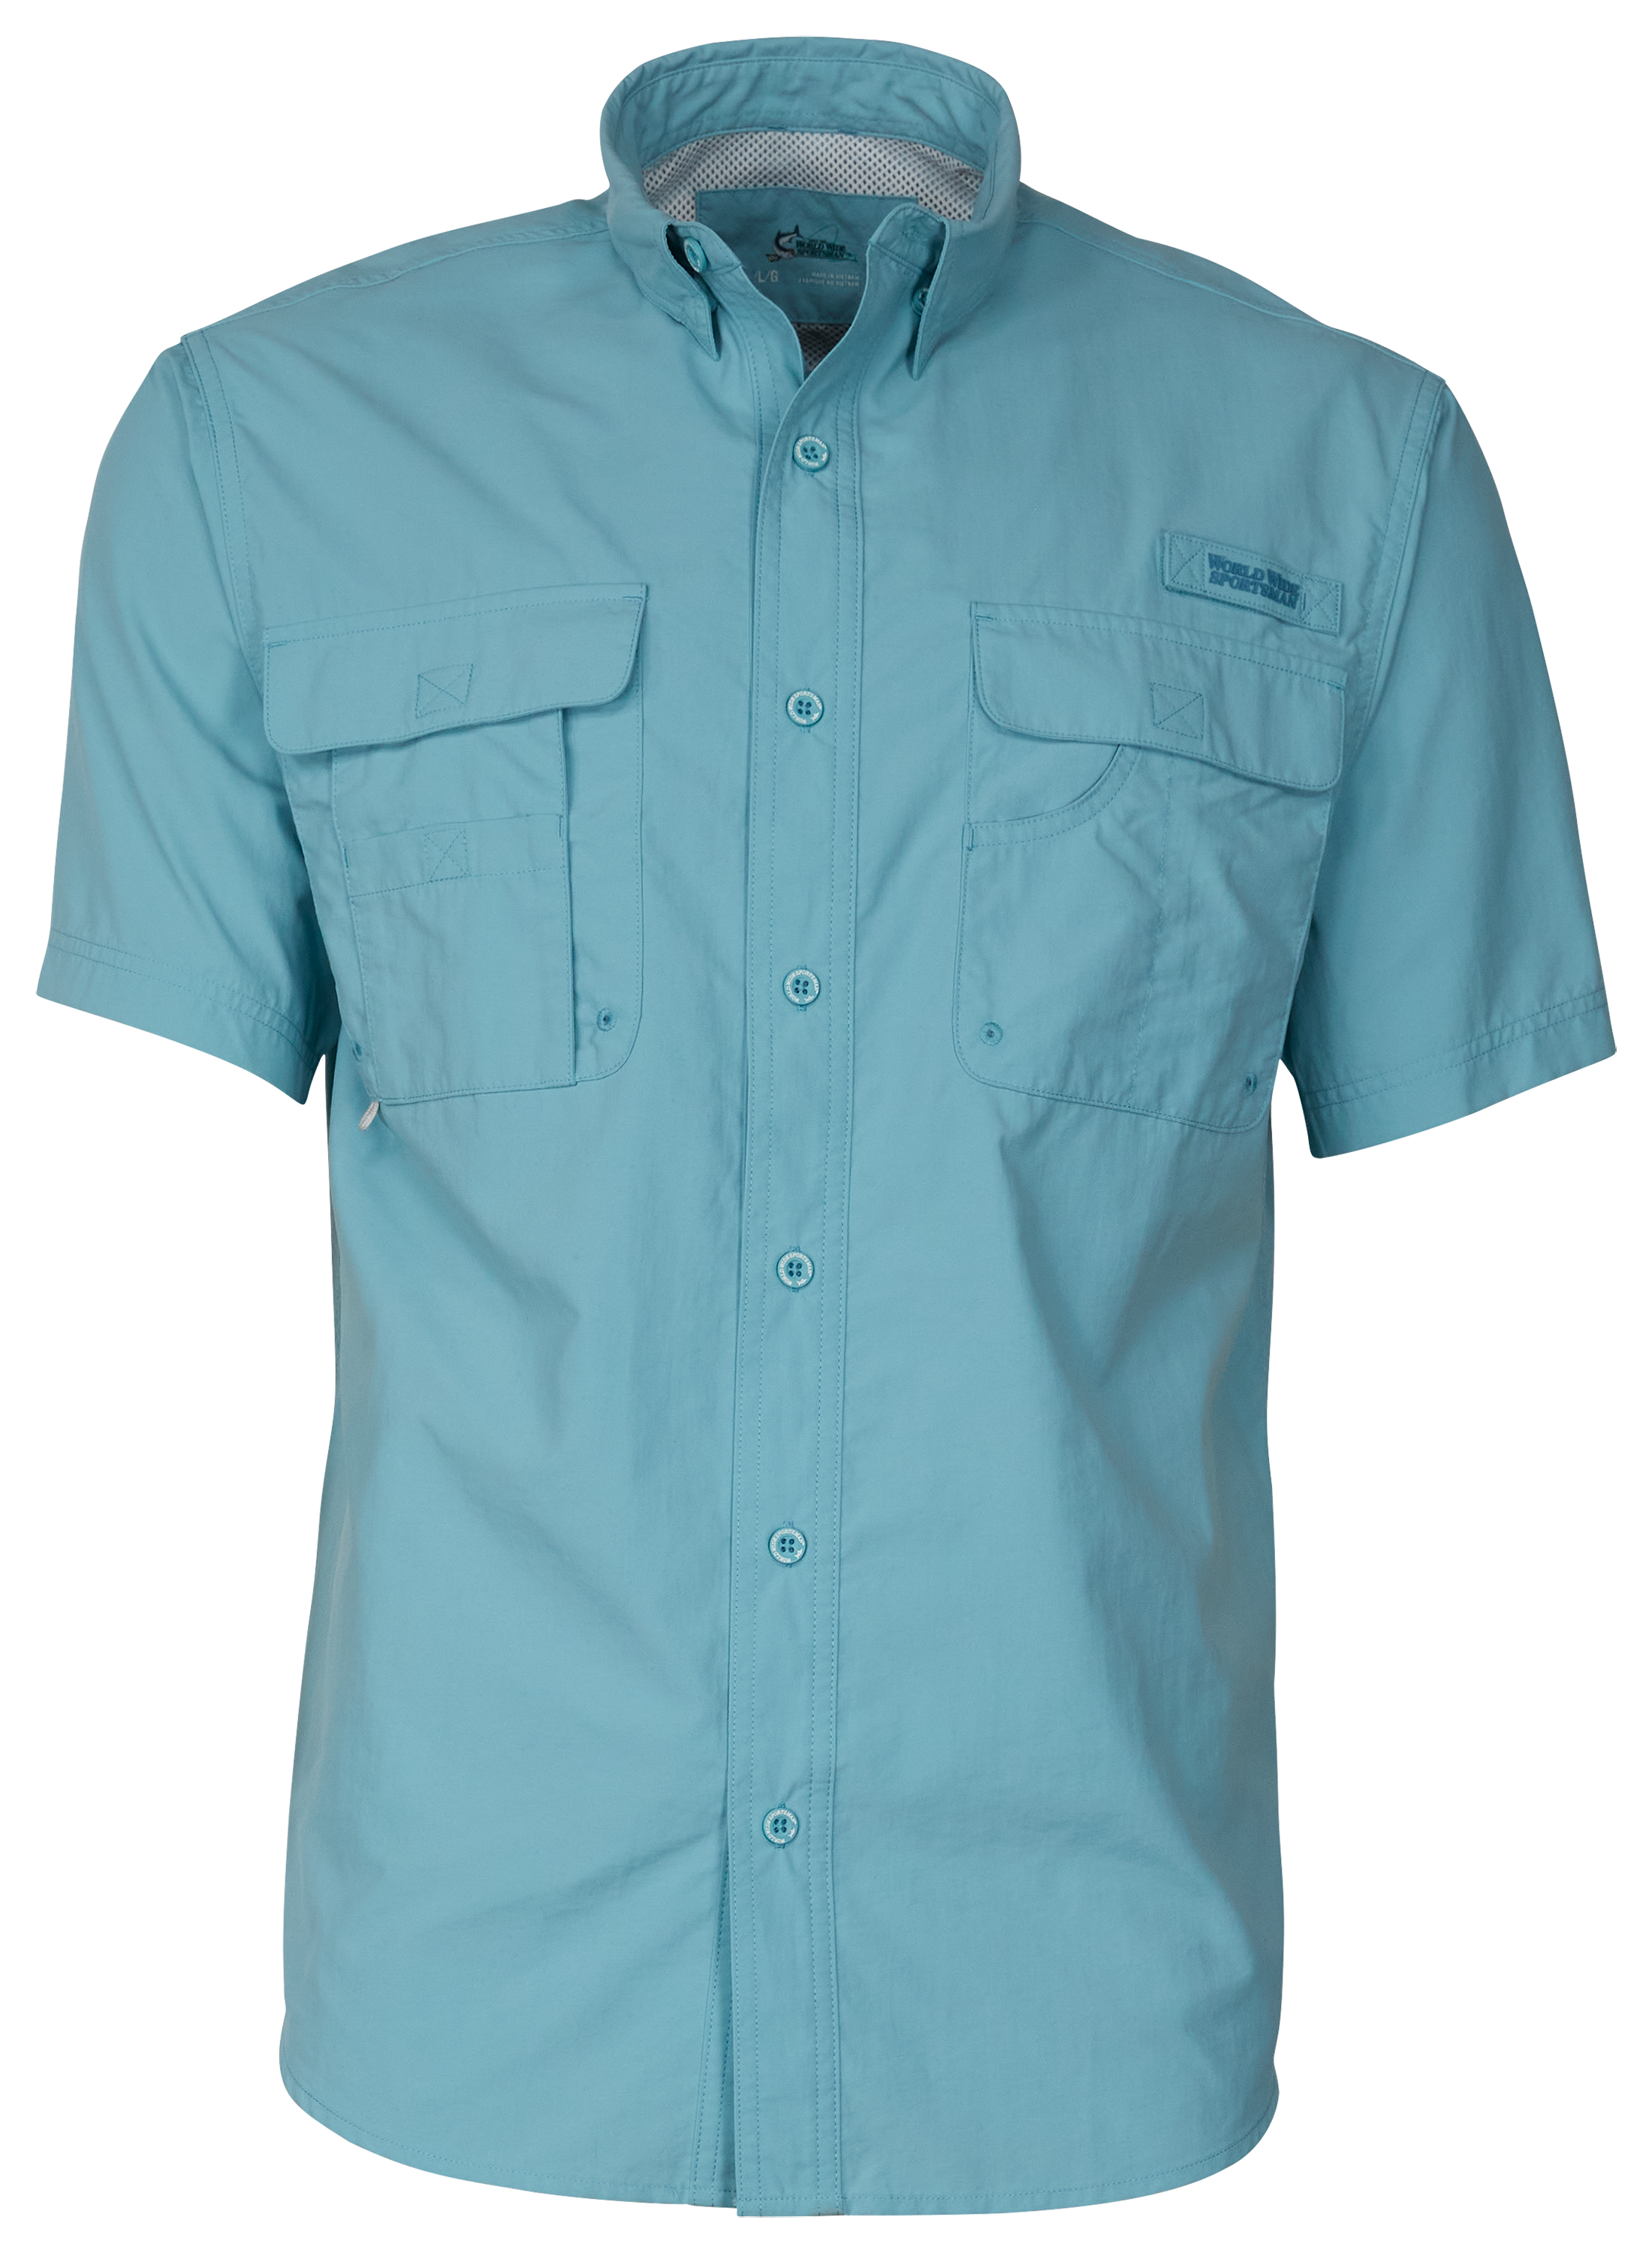 World Wide Sportsman Recycled-Nylon Angler 2.0 Short-Sleeve Button-Down Shirt for Men - Reef Waters - M